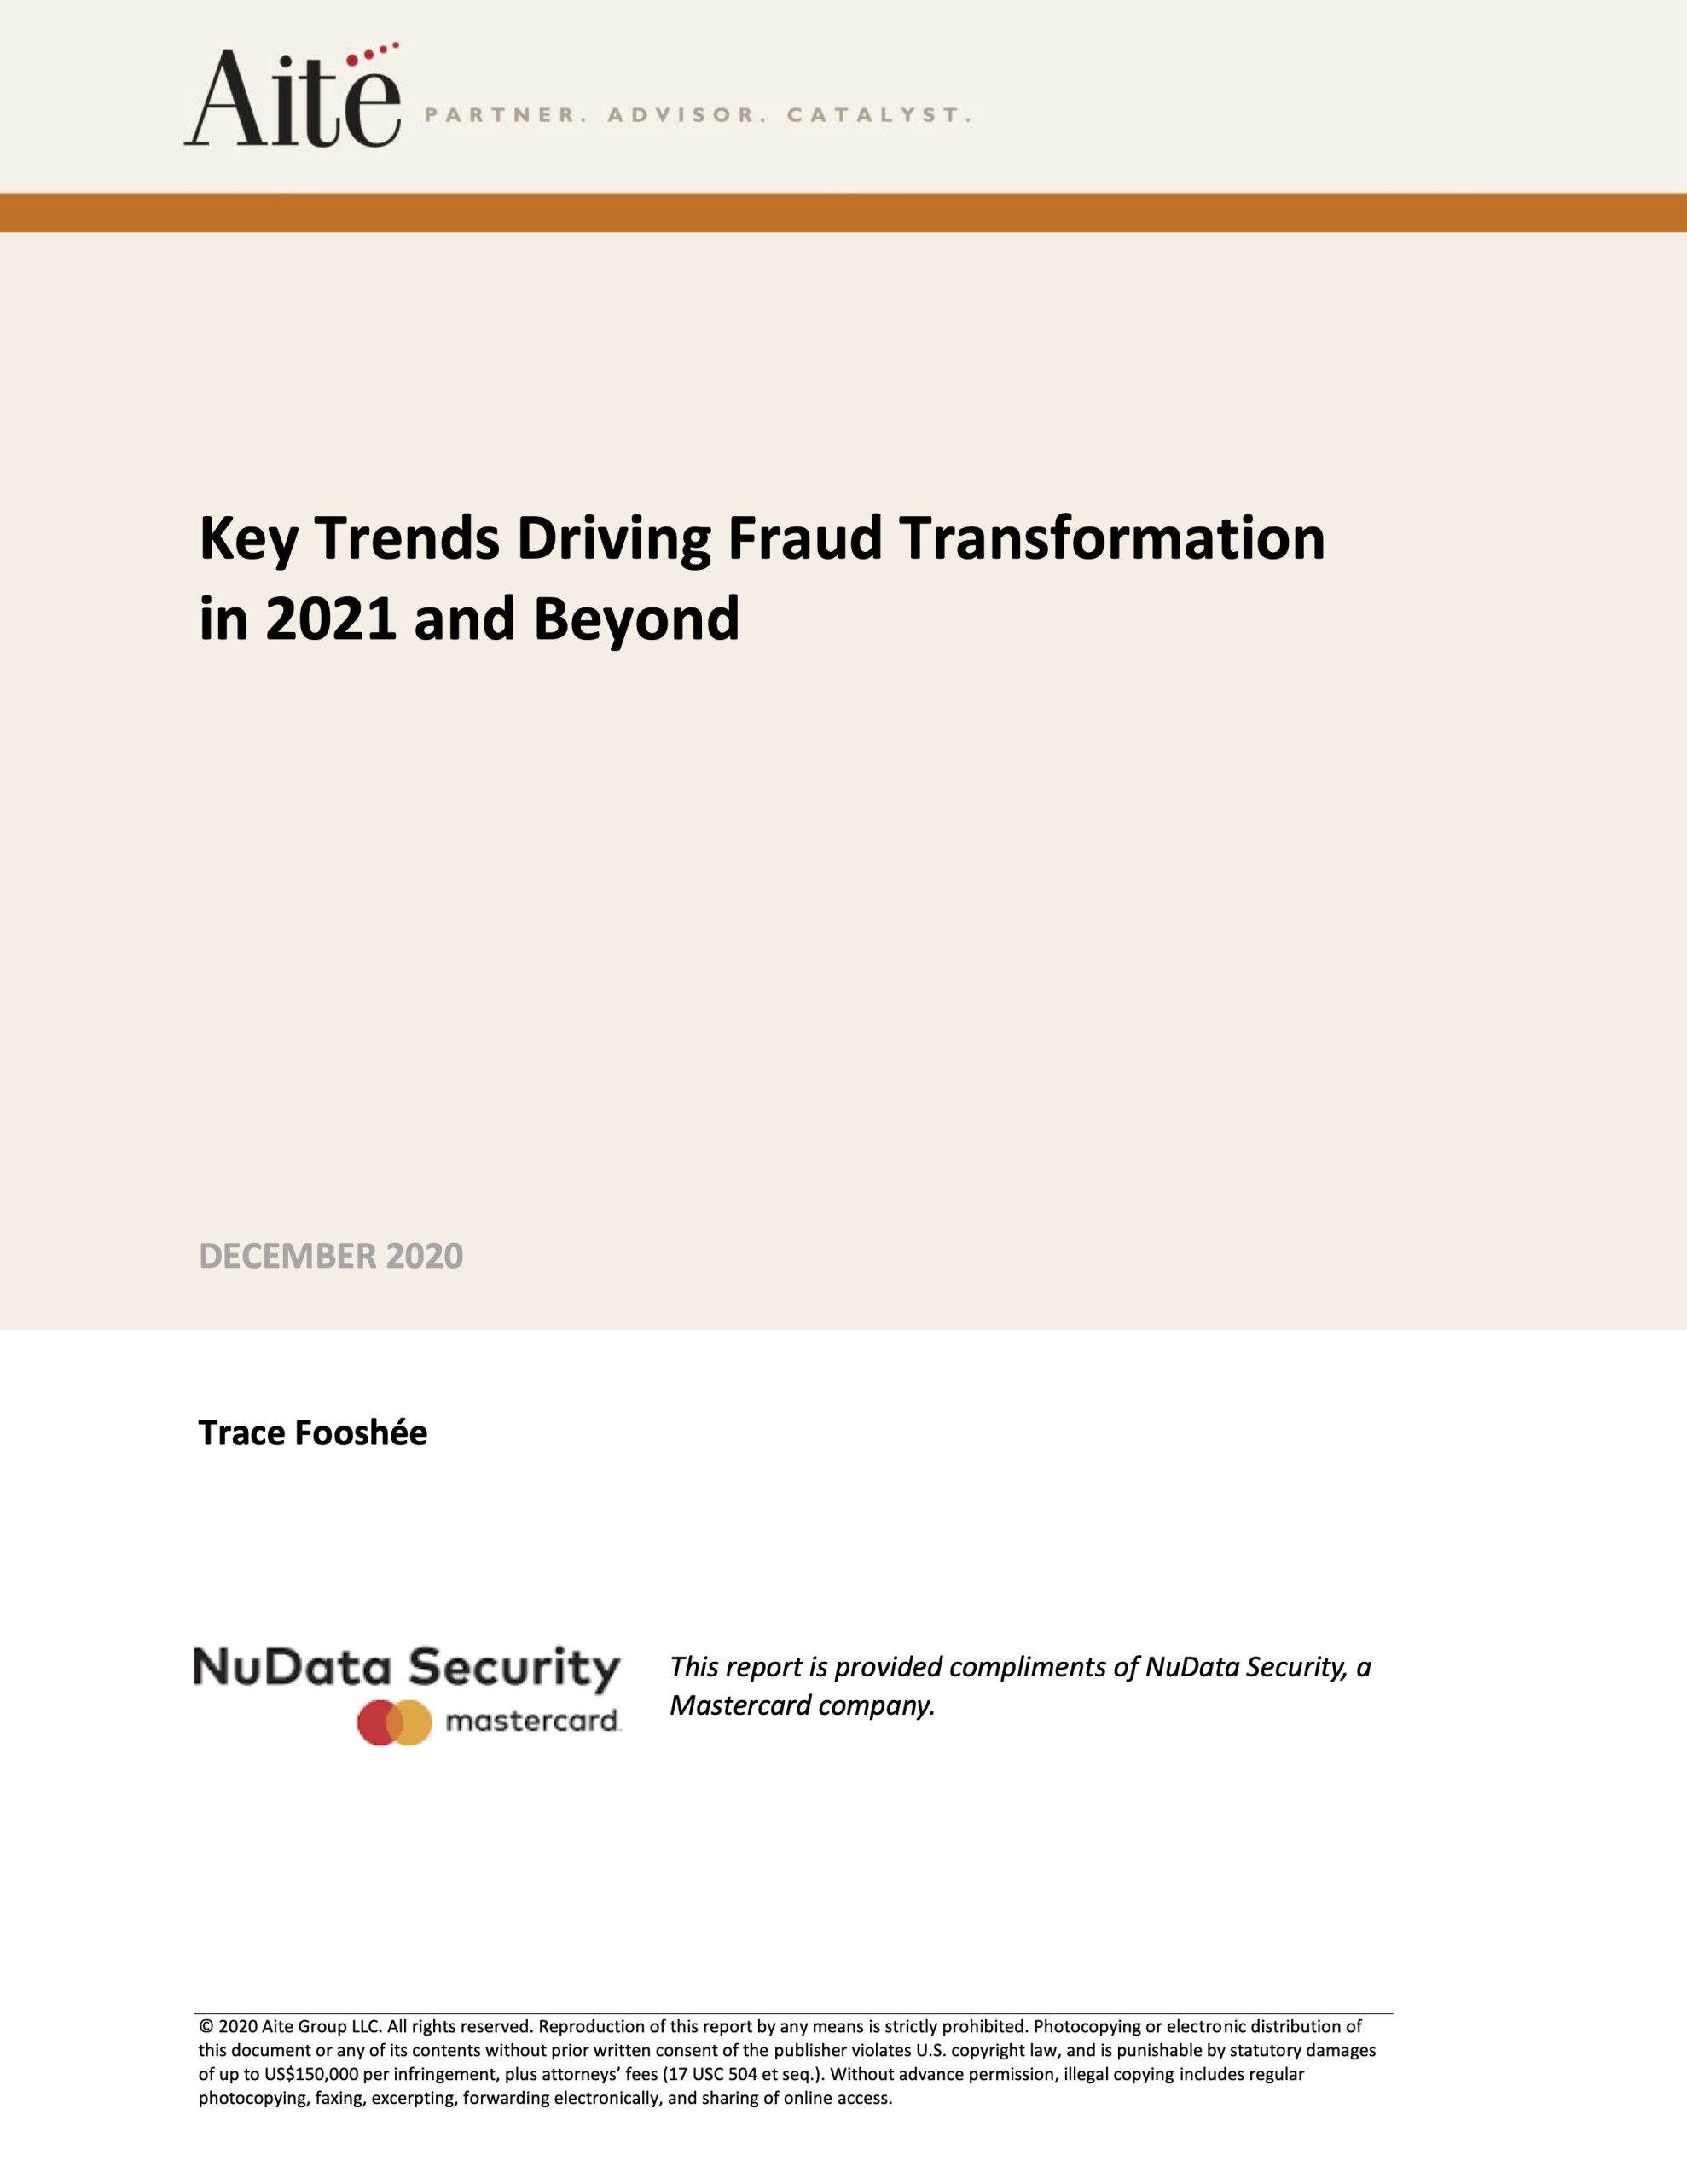 Key trends for FIs driving fraud transformation in 2021 and beyond